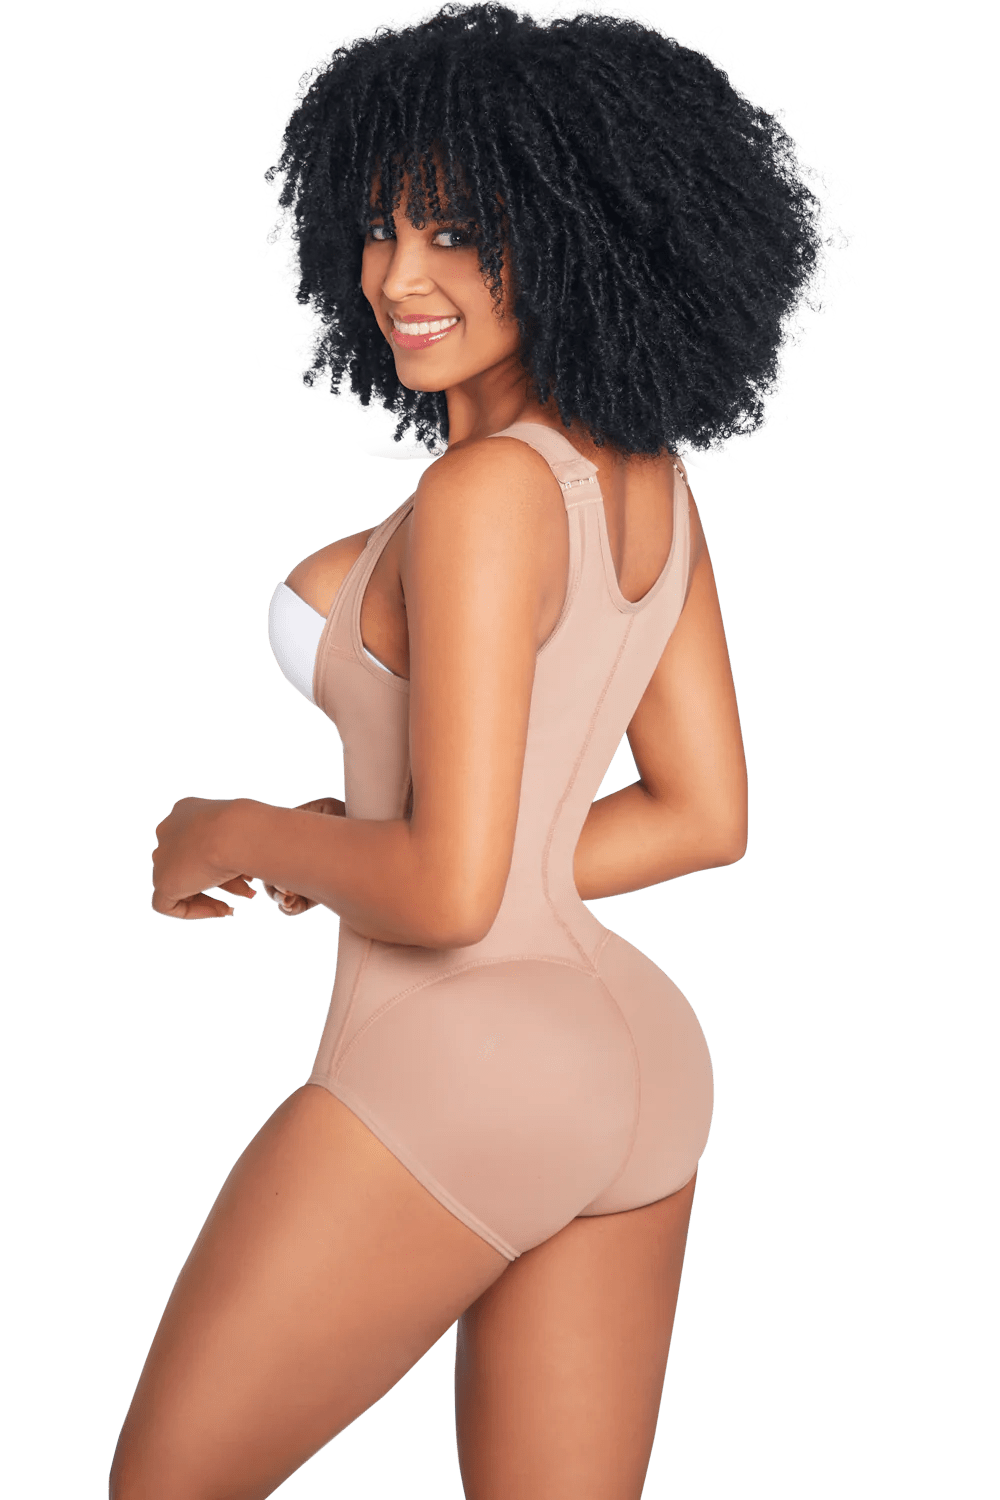 Ily Clothing Shapwear Wide Strapped Full Bodyshaper